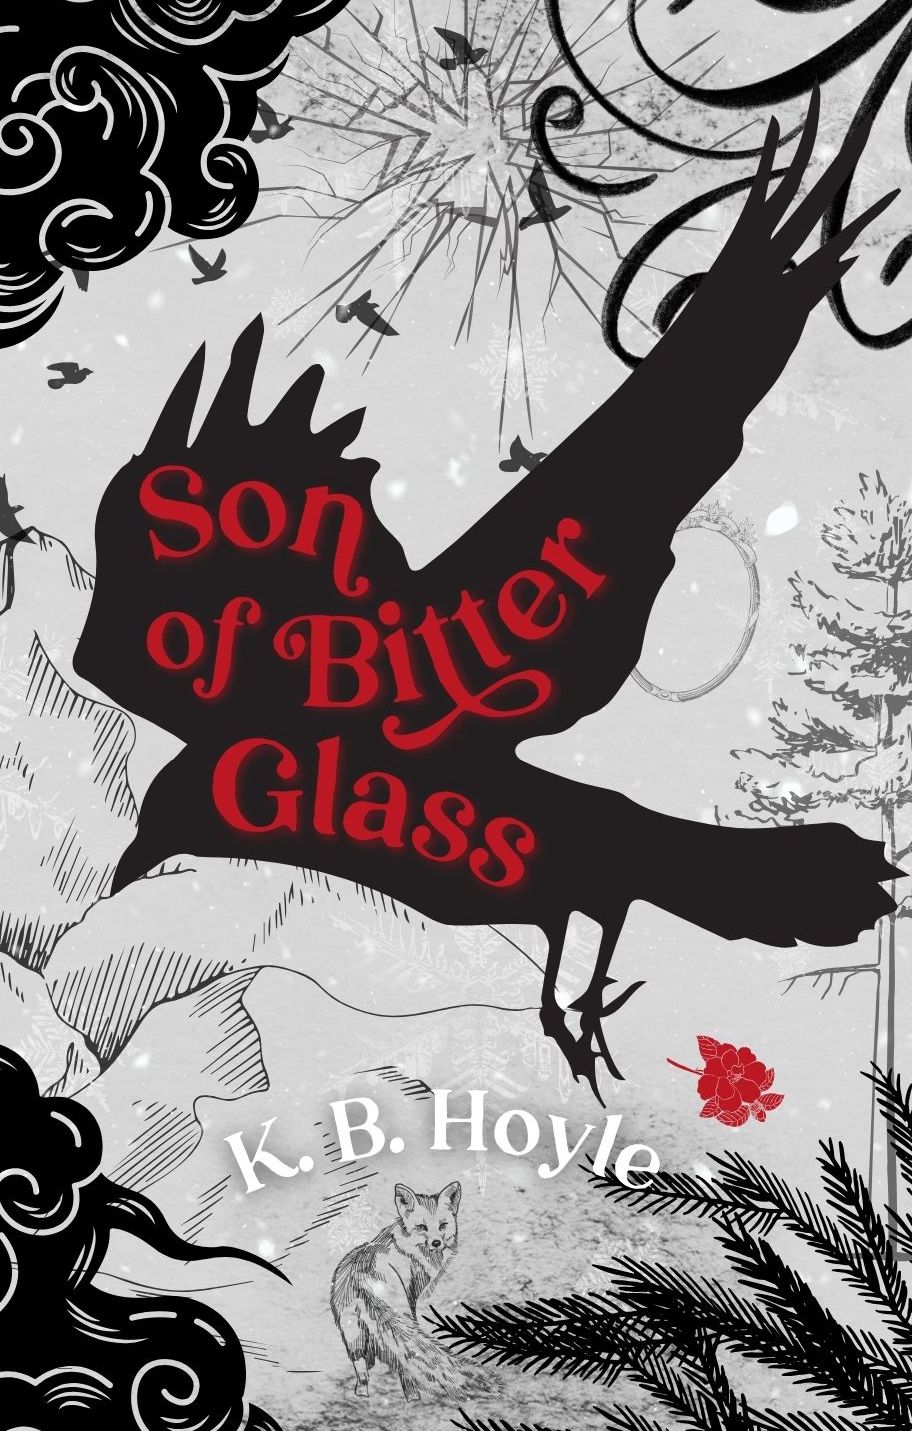 Son of Bitter Glass – A Book Review